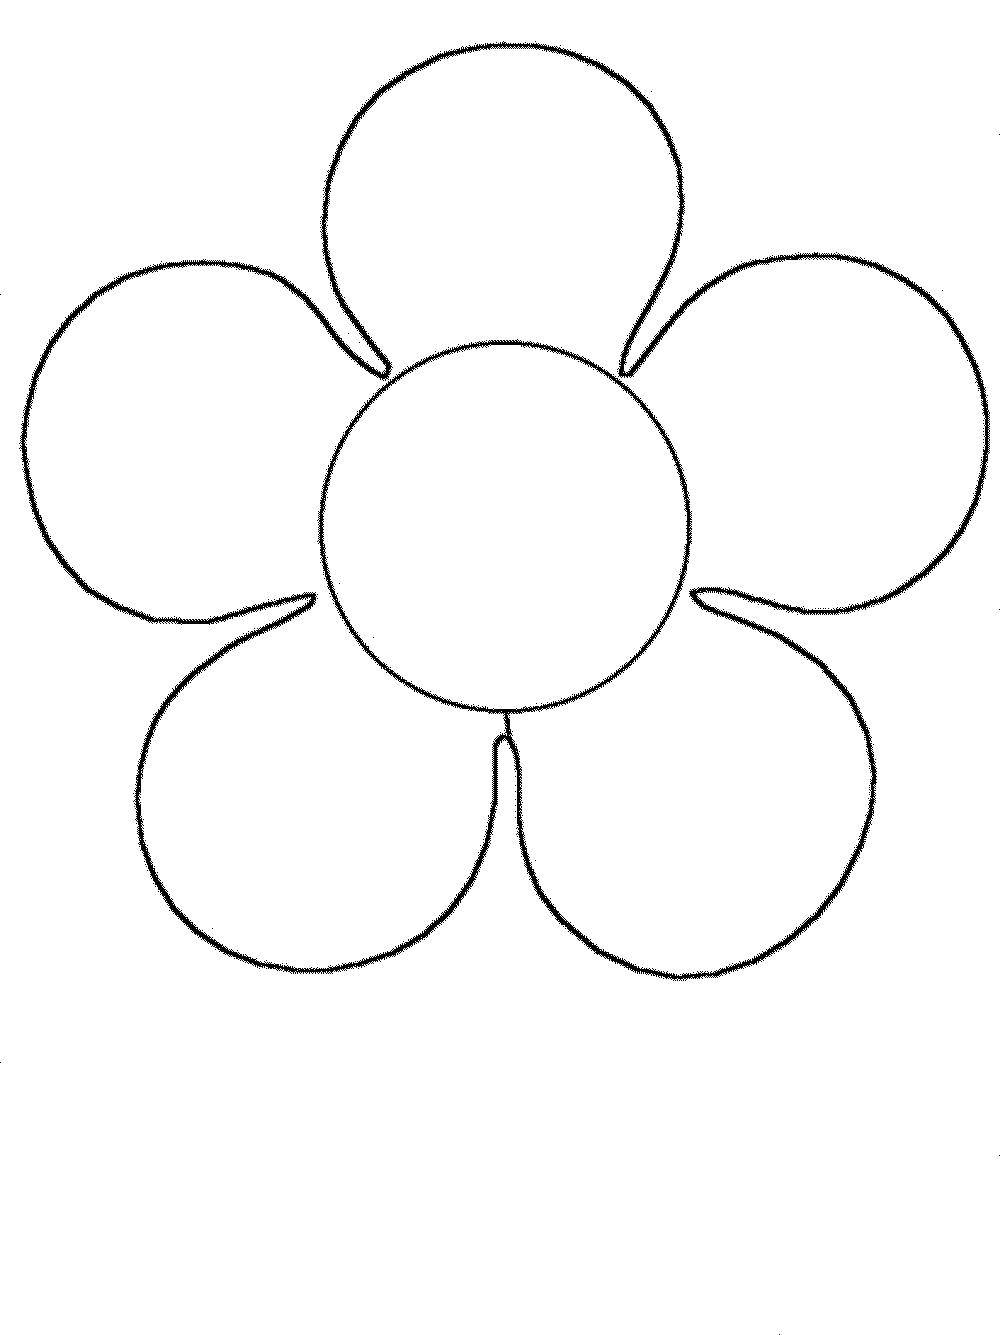 Coloring Flower simple. Category For girls. Tags:  flowers, plants, buds, petals.